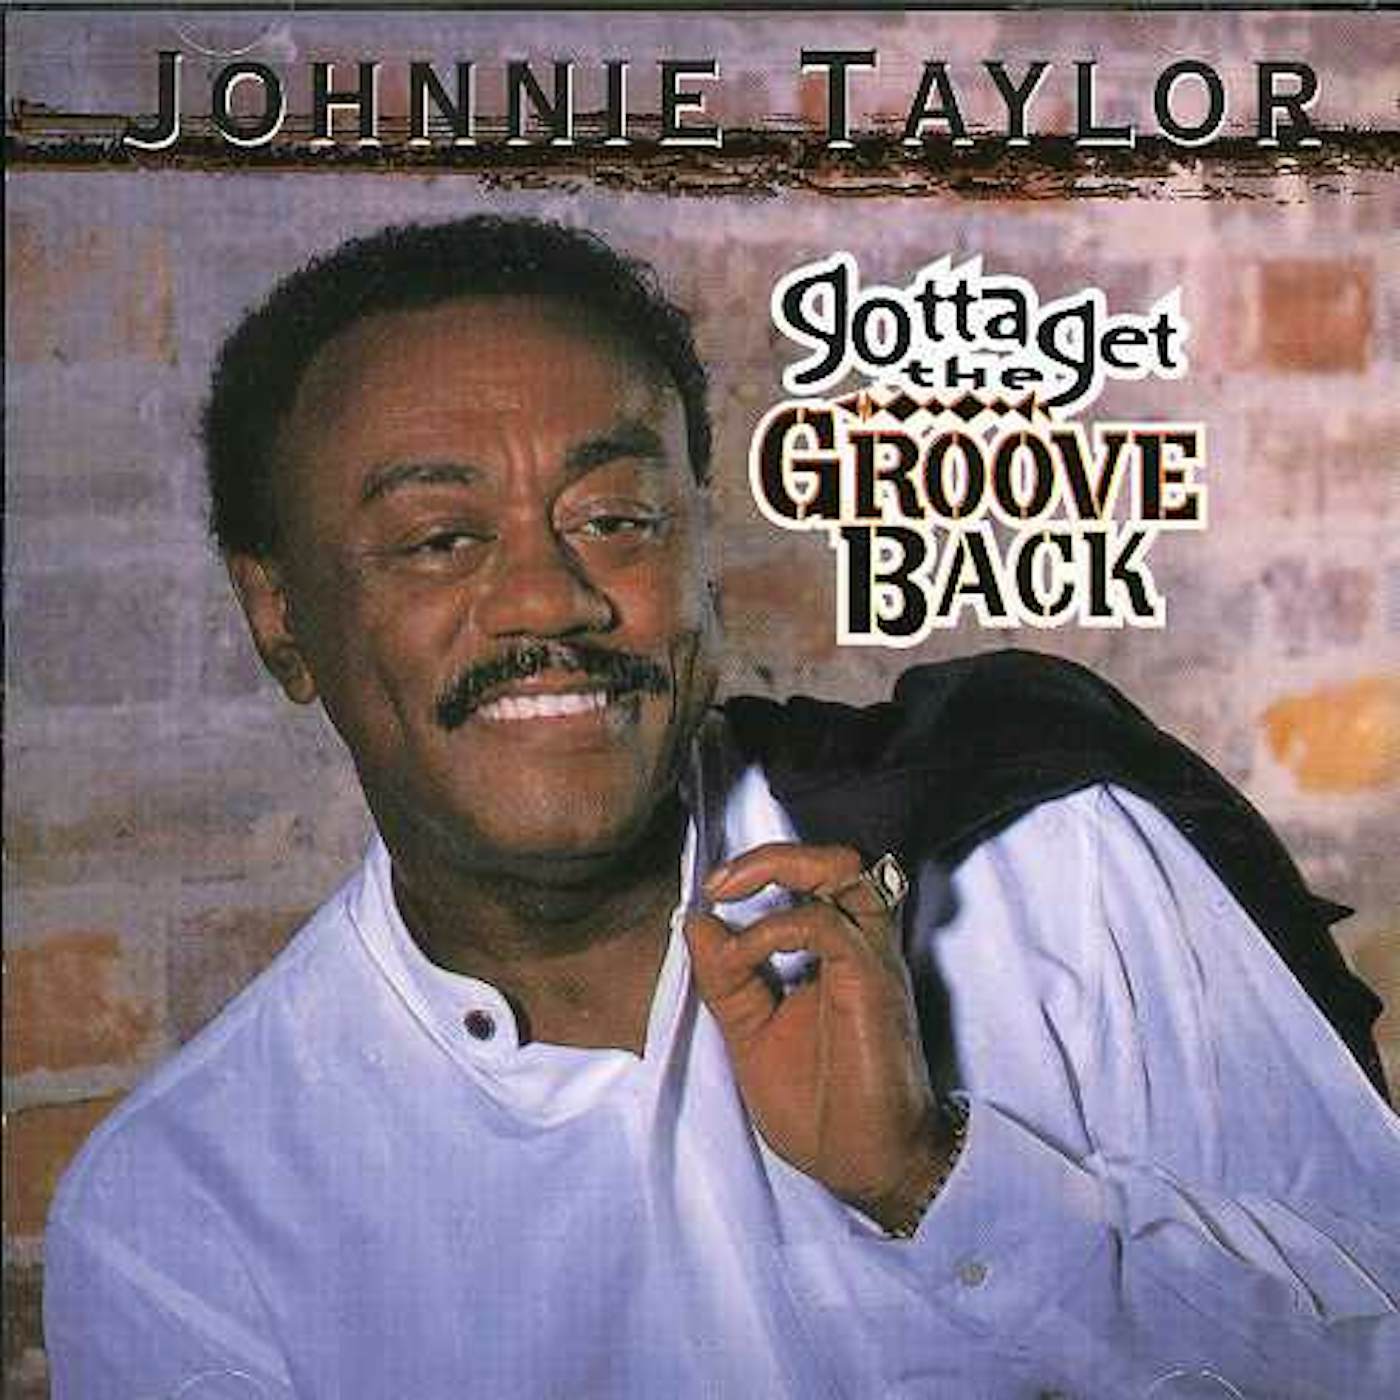 Johnnie Taylor GOTTA GET THE GROOVE BACK CD